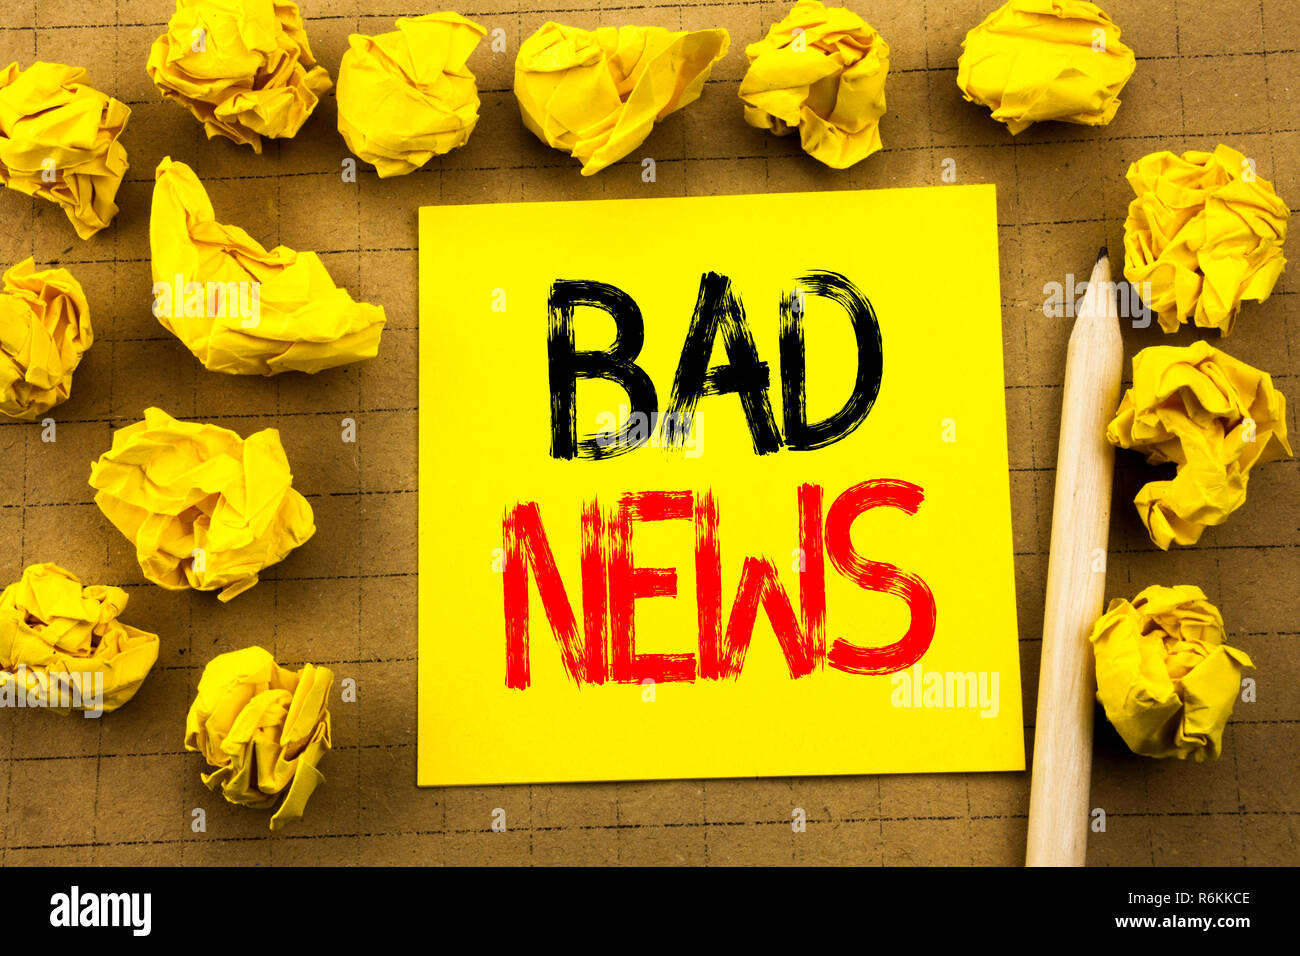 Bad News. Business concept for Failure Media Newspaper written on sticky note paper on the vintage background. Folded yellow papers on the background Stock Photo